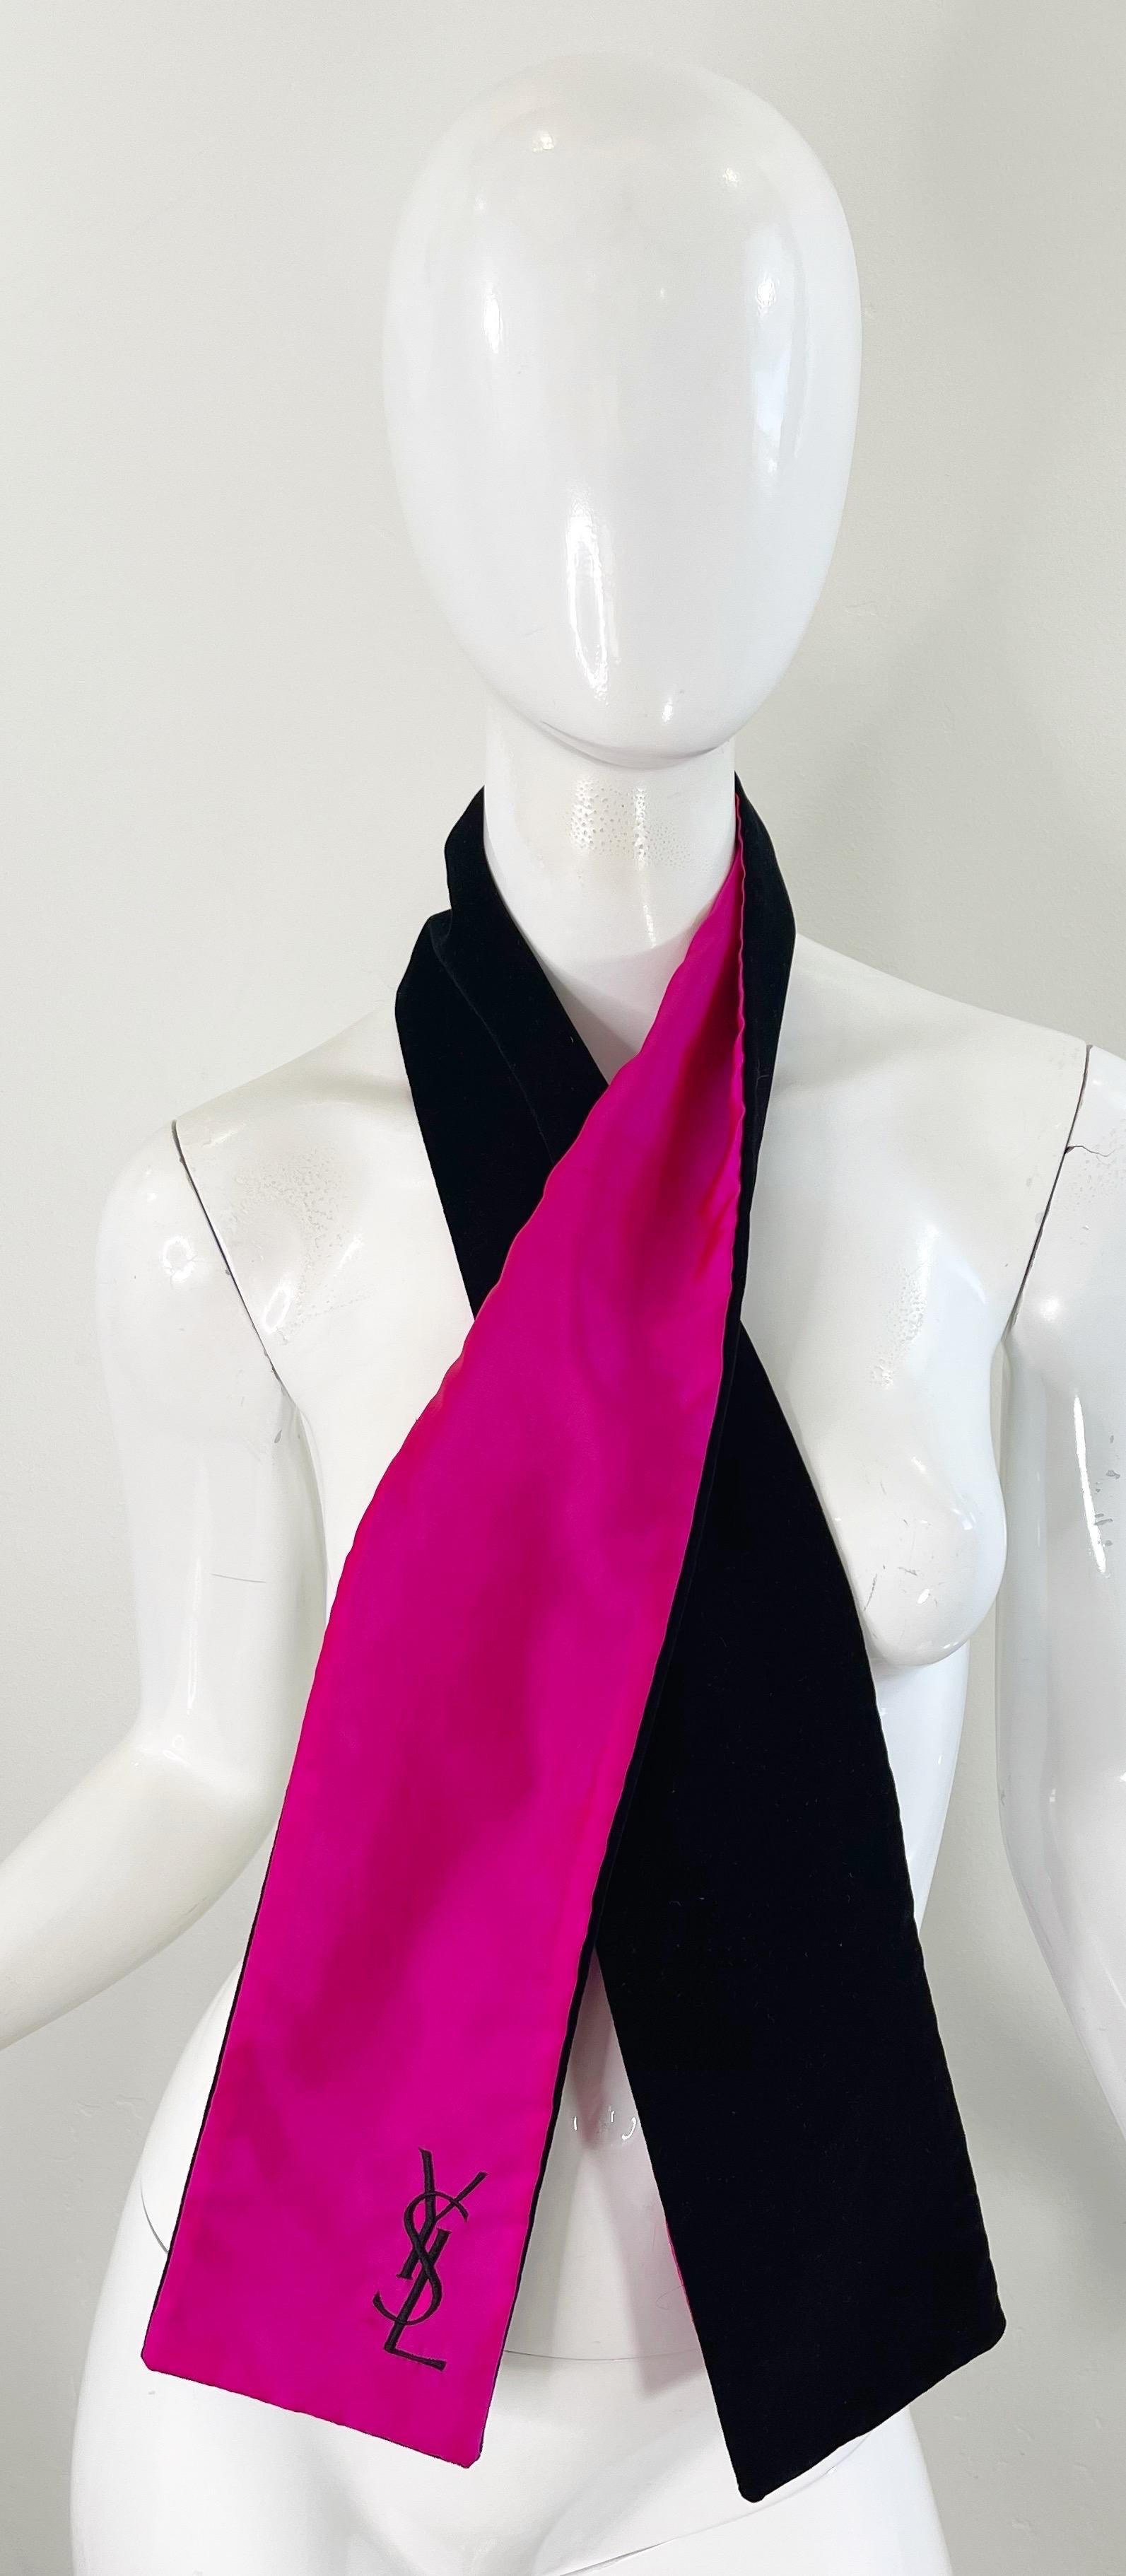 Beautiful vintage YVES SAINT LAURENT reversible hot pink silk and black silk velvet stole. YSL embroidered on the pink side. Can be worn multiple ways.
In great condition 
Made in France
Measurements:
54 inches in length
4.5 inches in width 